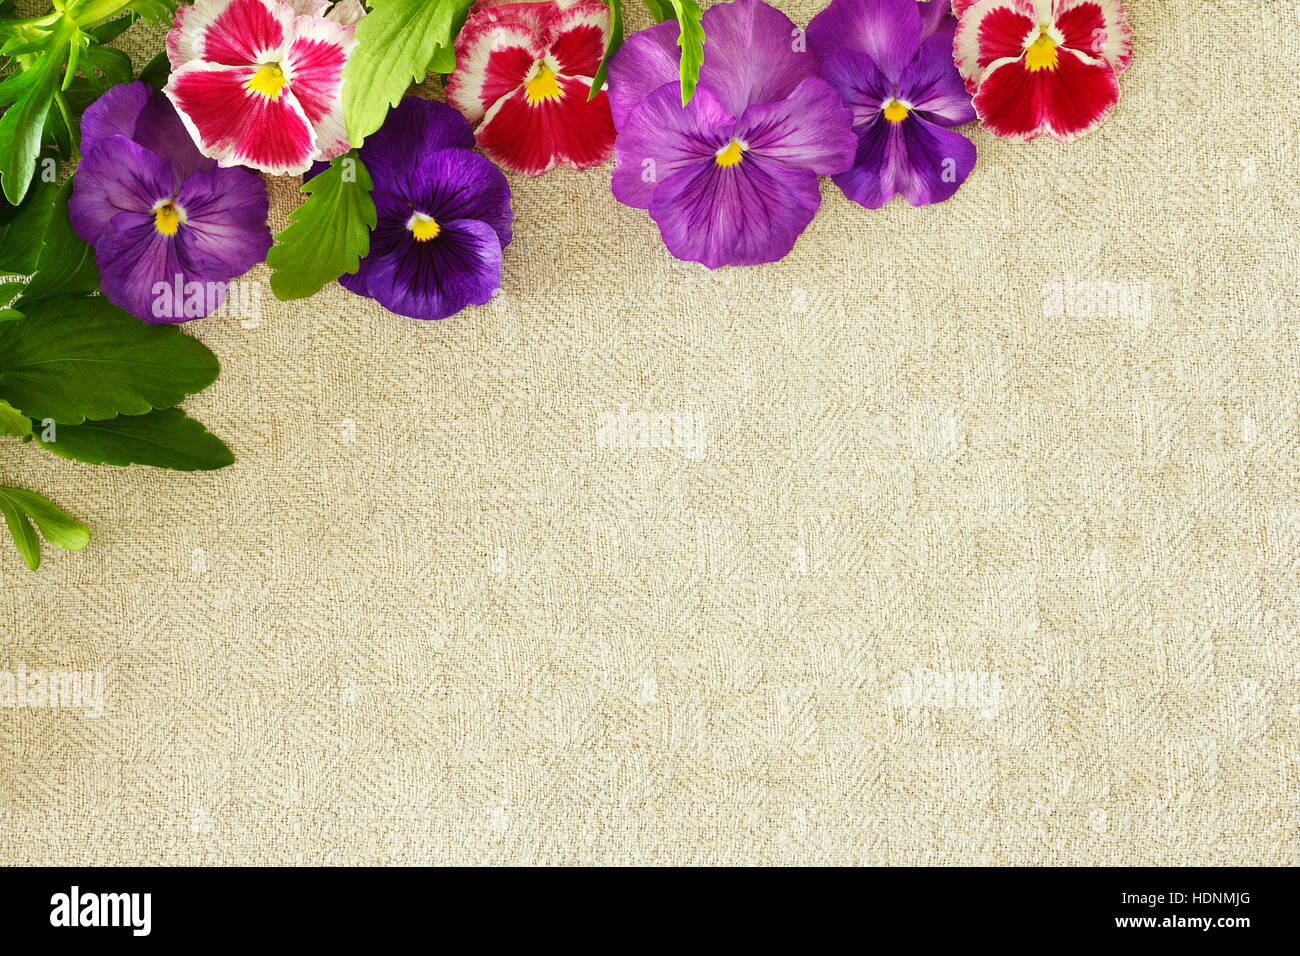 Border of purple and red pansy flowers with leaves on vintage beige linen background, copy or text space, template Stock Photo